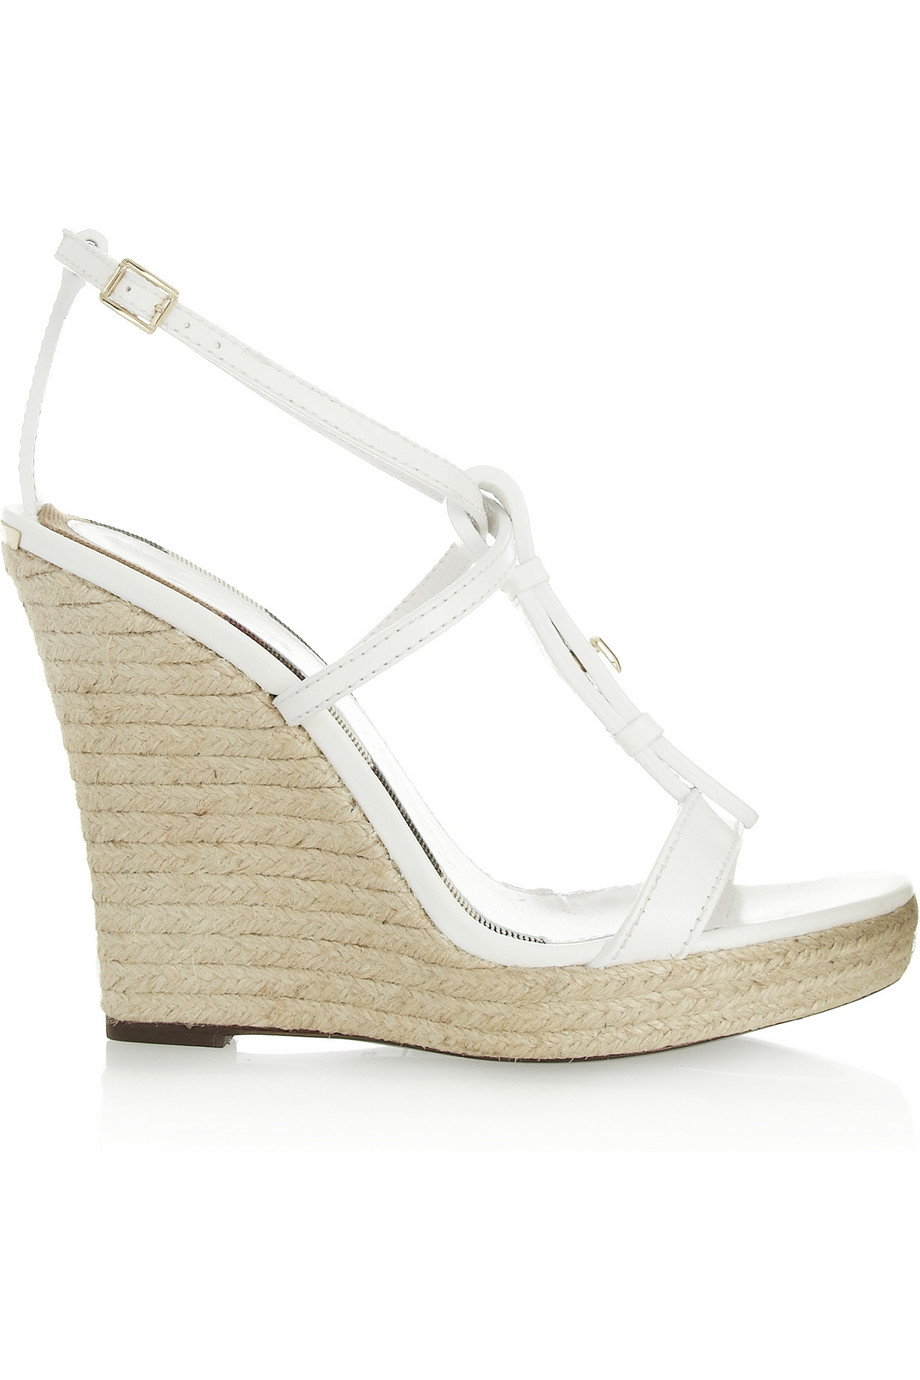 Lyst - Burberry Leather Wedge Espadrilles in White